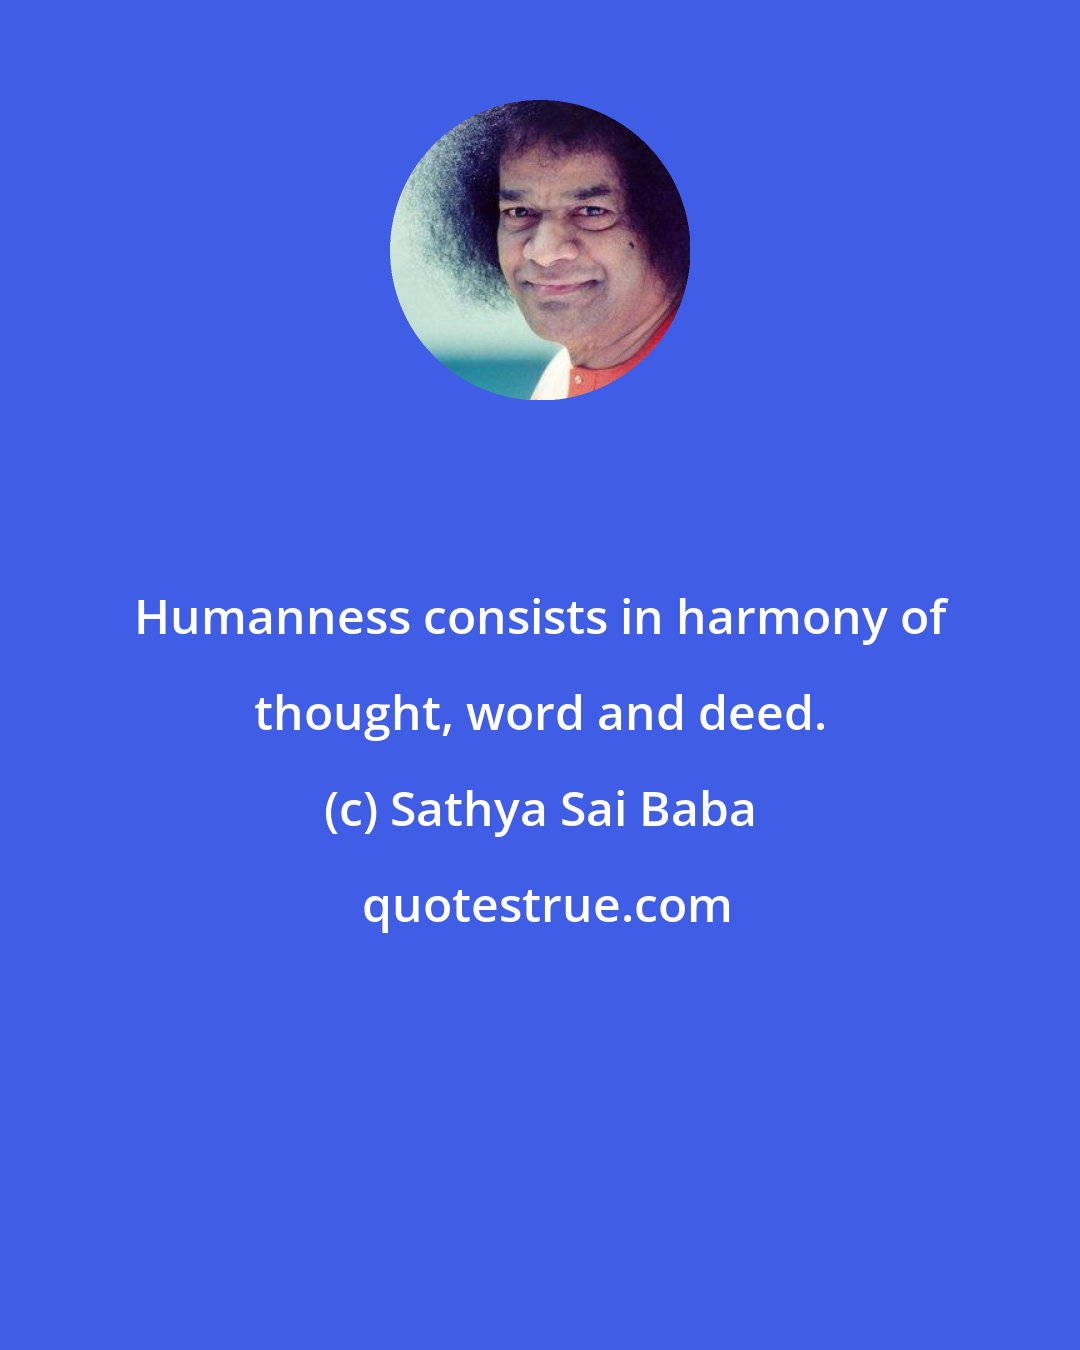 Sathya Sai Baba: Humanness consists in harmony of thought, word and deed.